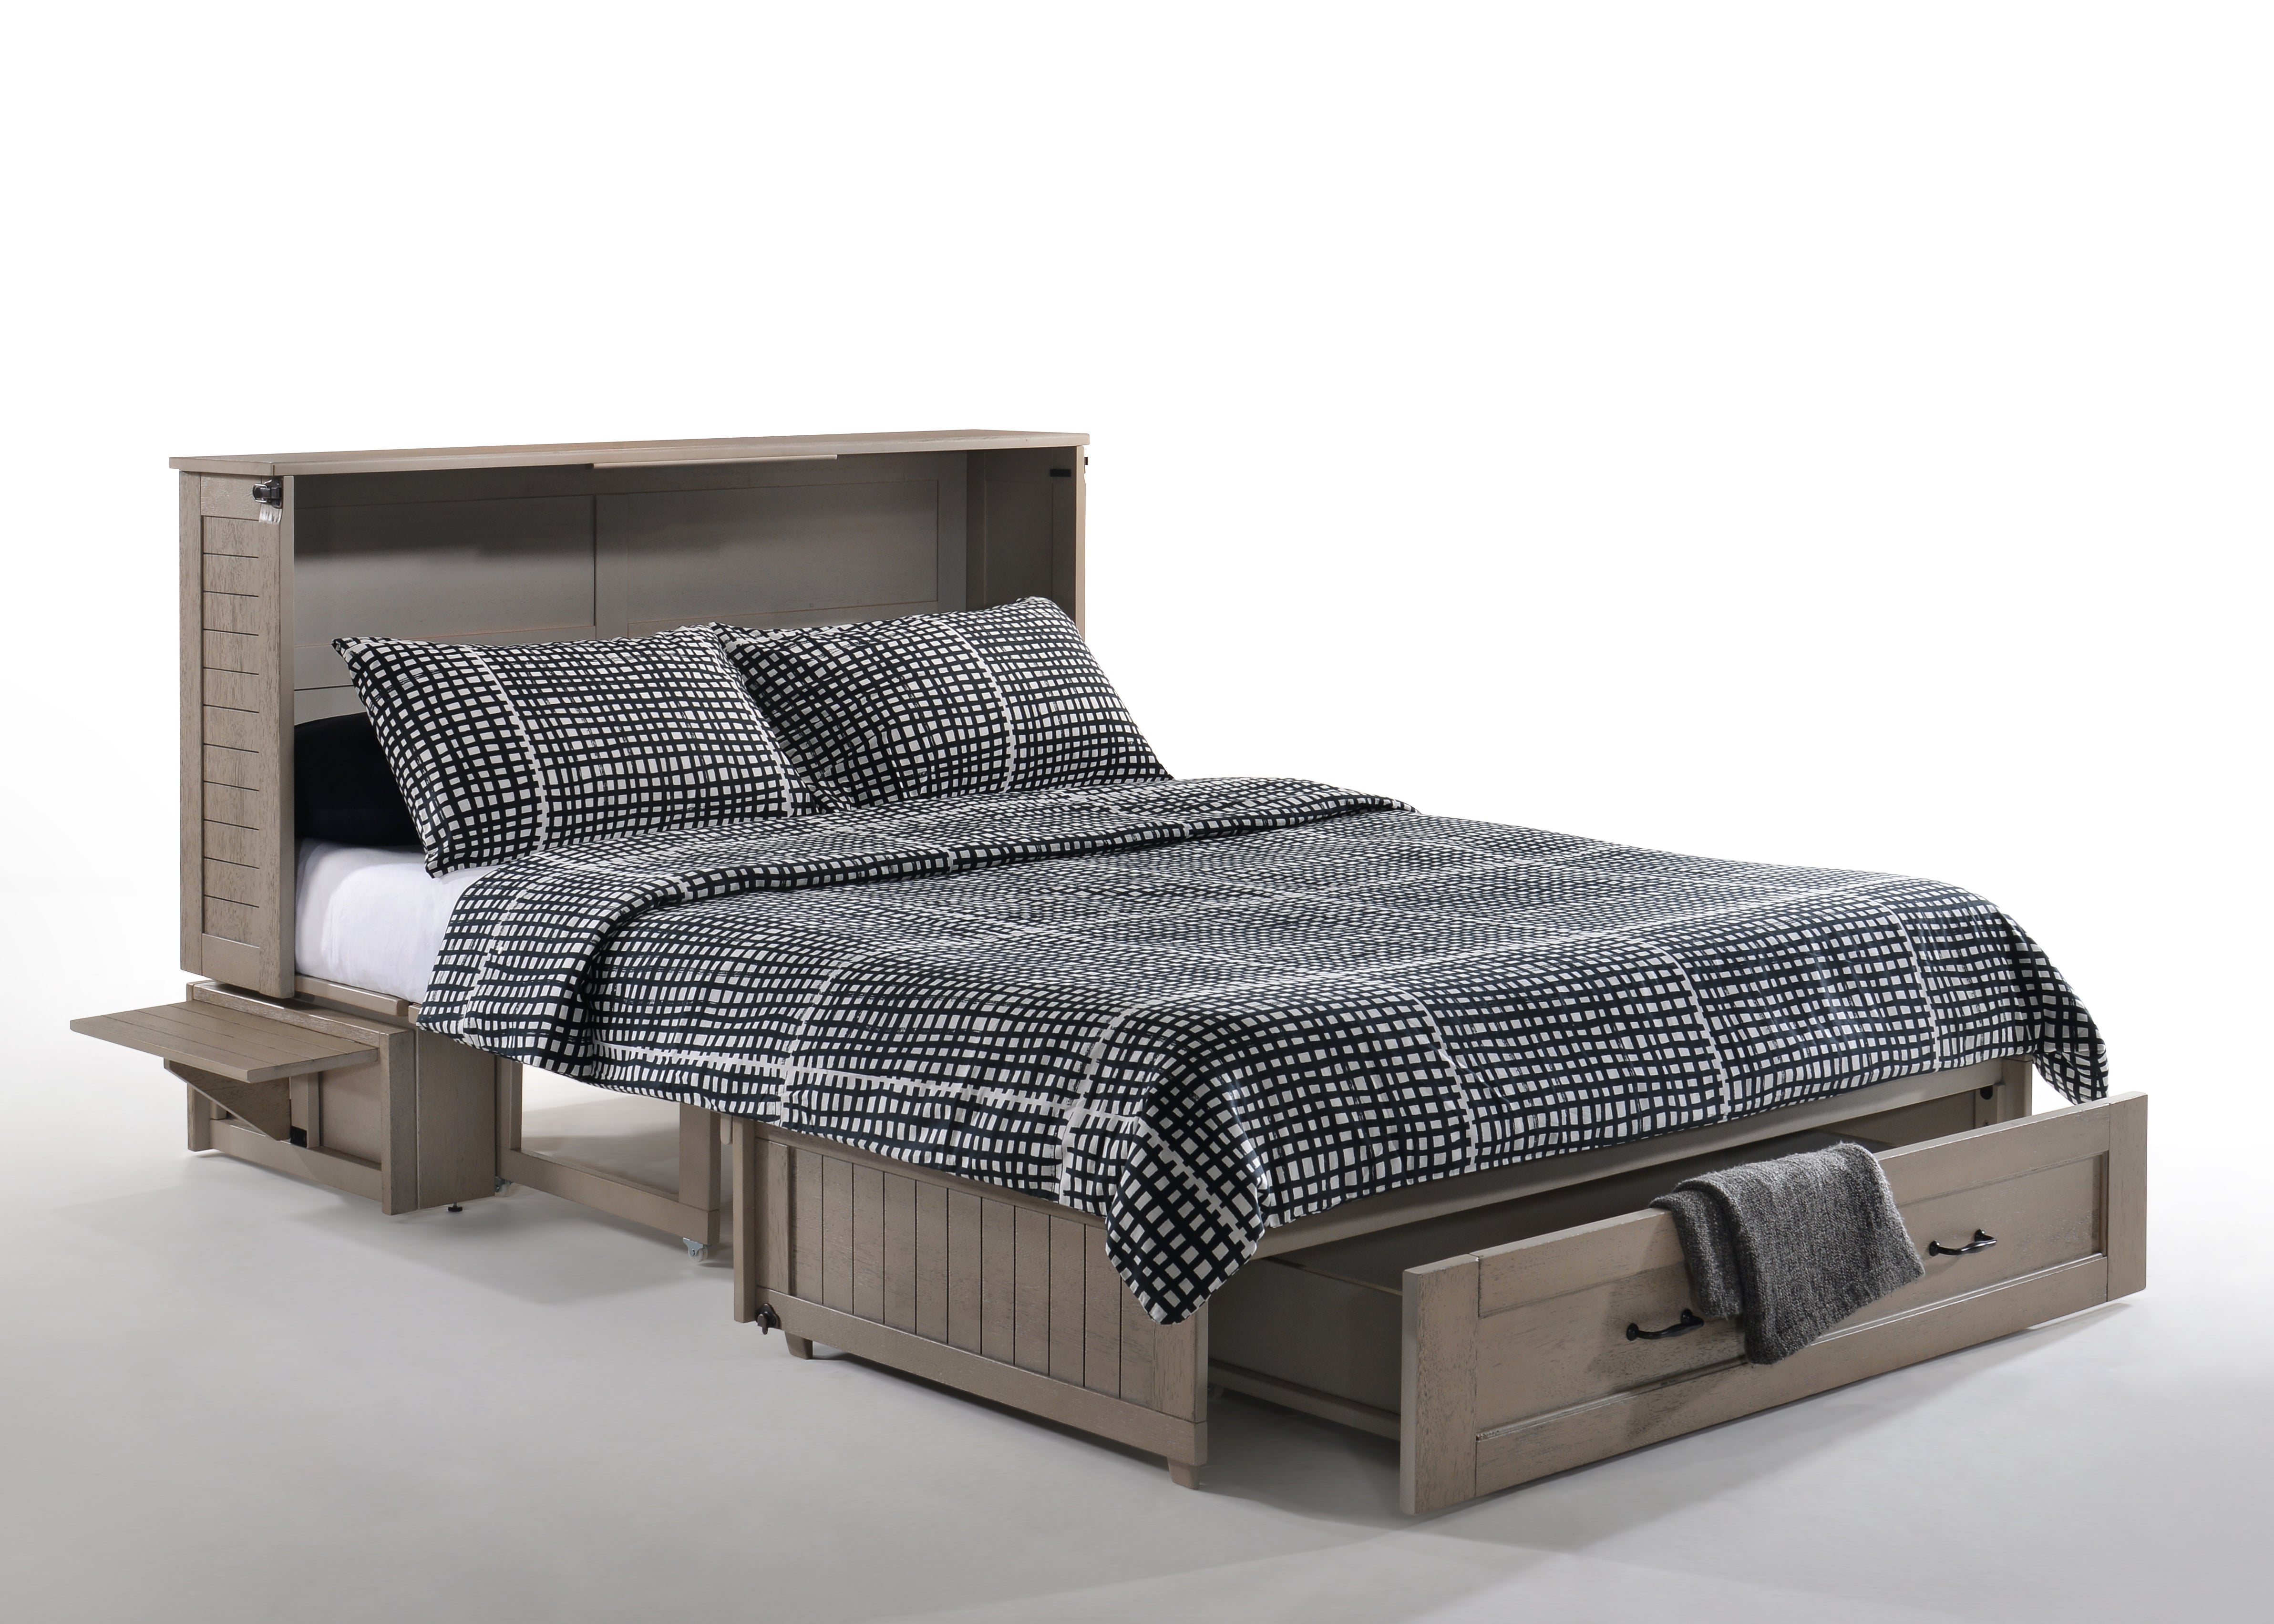 POPPY MURPHY CABINET BED with PREMIUM MATTRESS INCLUDED